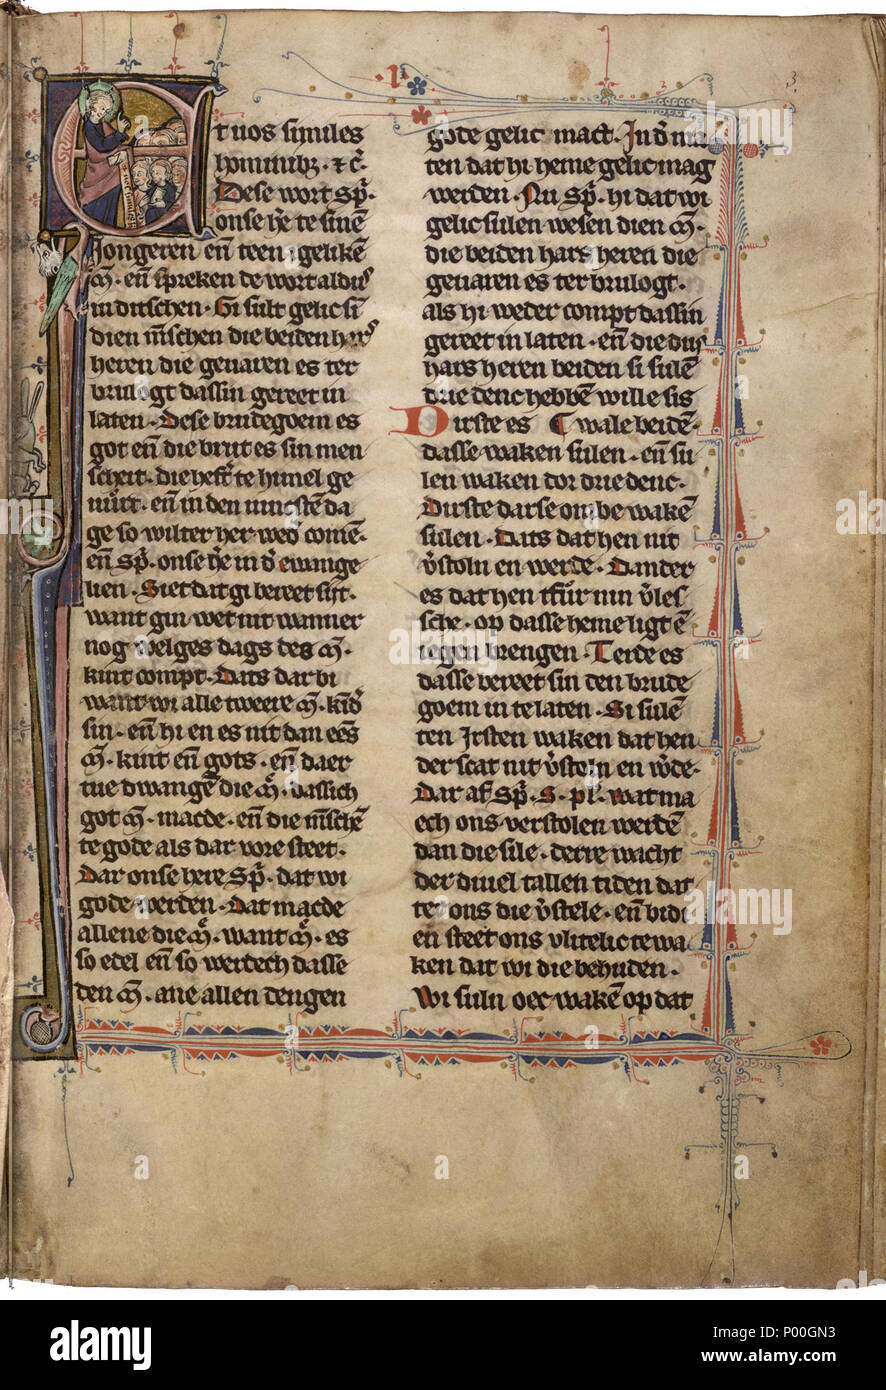 . English: A page from a manuscript of around 1300 of the Limburg Sermons and an Easter Play, copied by the Monastery of St Andrew in Maastricht, the Netherlands. Now in the collection of the Koninklijke Bibliotheek, The Hague (KB ms. 70 E 5).  . 25 June 2008, 17:50:48. Unknown scribe from Maastricht, ca 1300 14 Limburgse Sermoenen, St-Andriesklooster, ca 1300 (KB 70 E 5) - 1 Stock Photo